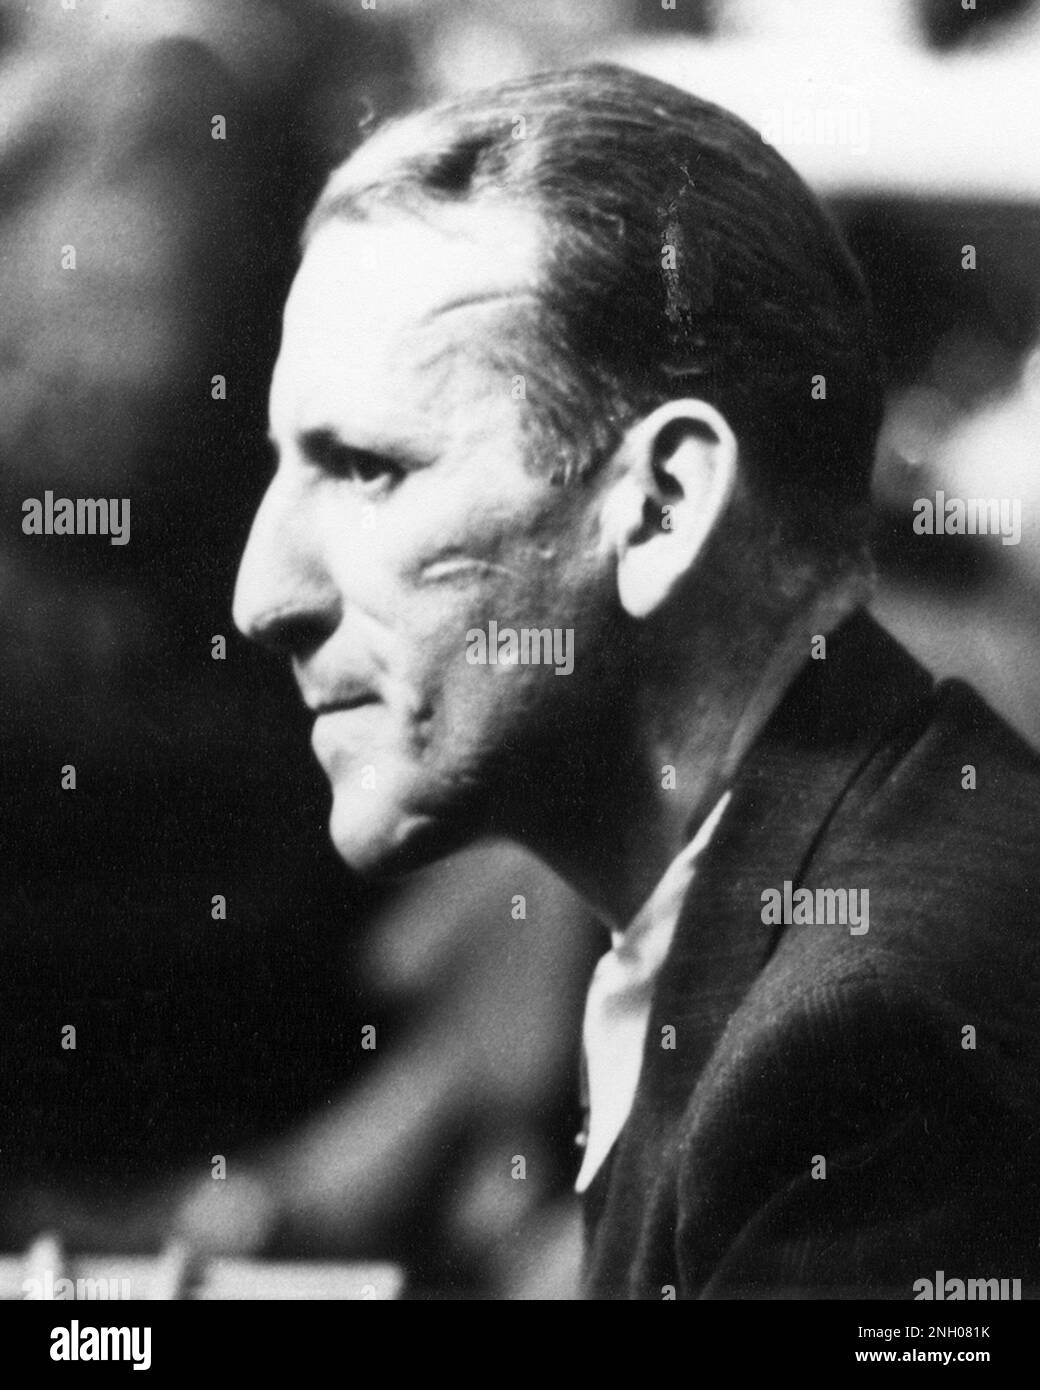 Close-up portrait of Nuremberg defendant, SS Lieutenant General Ernst Kaltenbrunner. Kaltenbrunner was a committed Nazi and a major player in the Holocaust. He was convicted at the Nuremburg trials and executed on 16 October 1946. Stock Photo